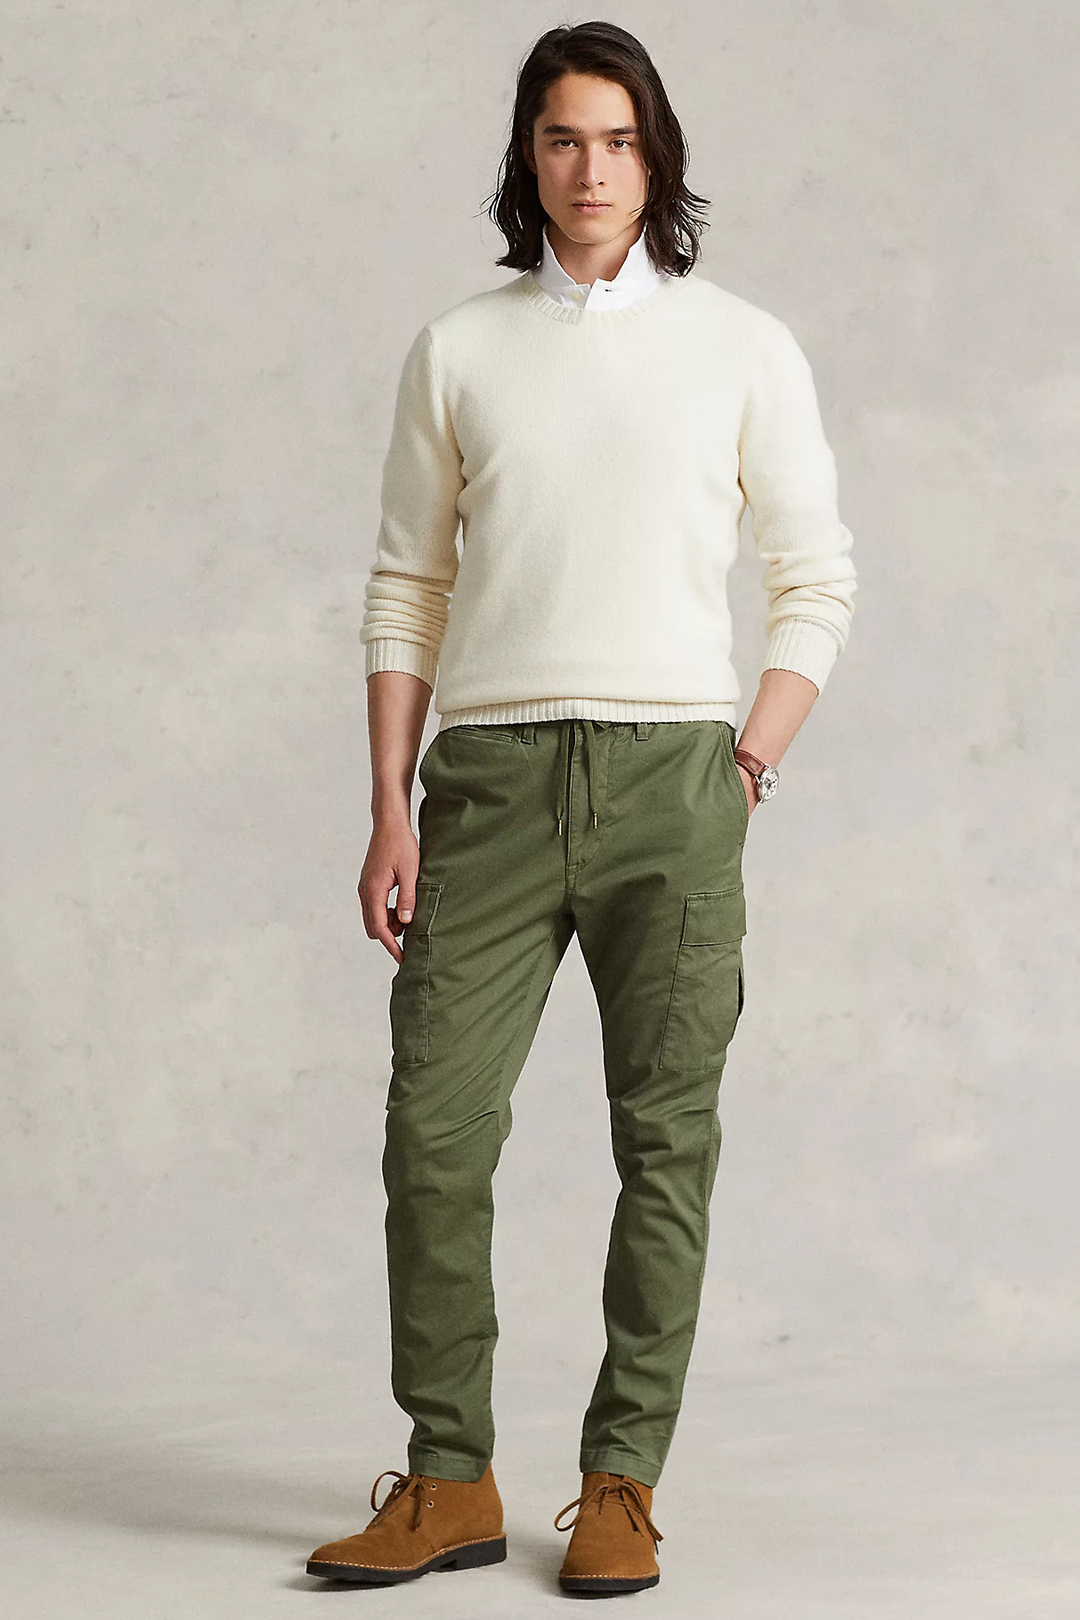 Cream sweater, white dress shirt, green cargo pants, and brown chukka boots outfit